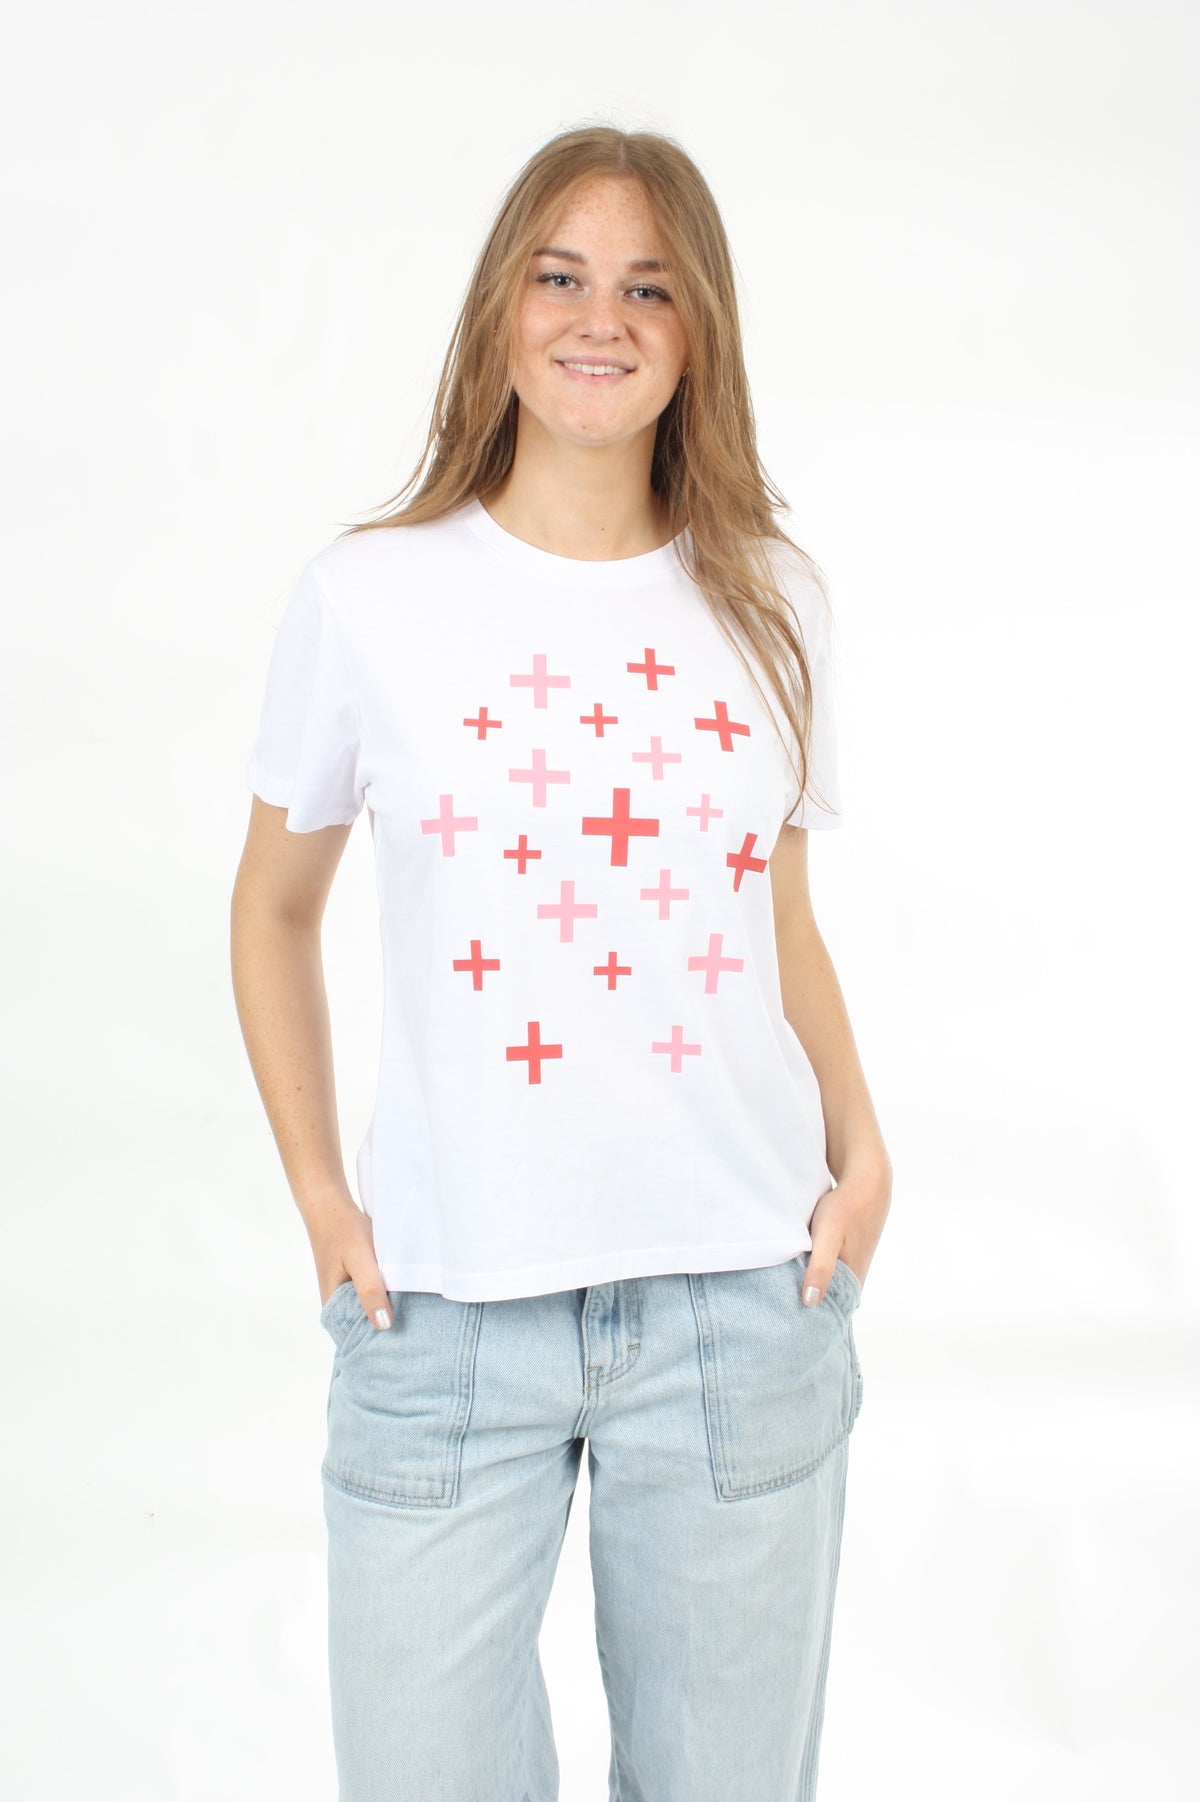 Tee Shirt - Pink and Red Crosses Print - Pre Order